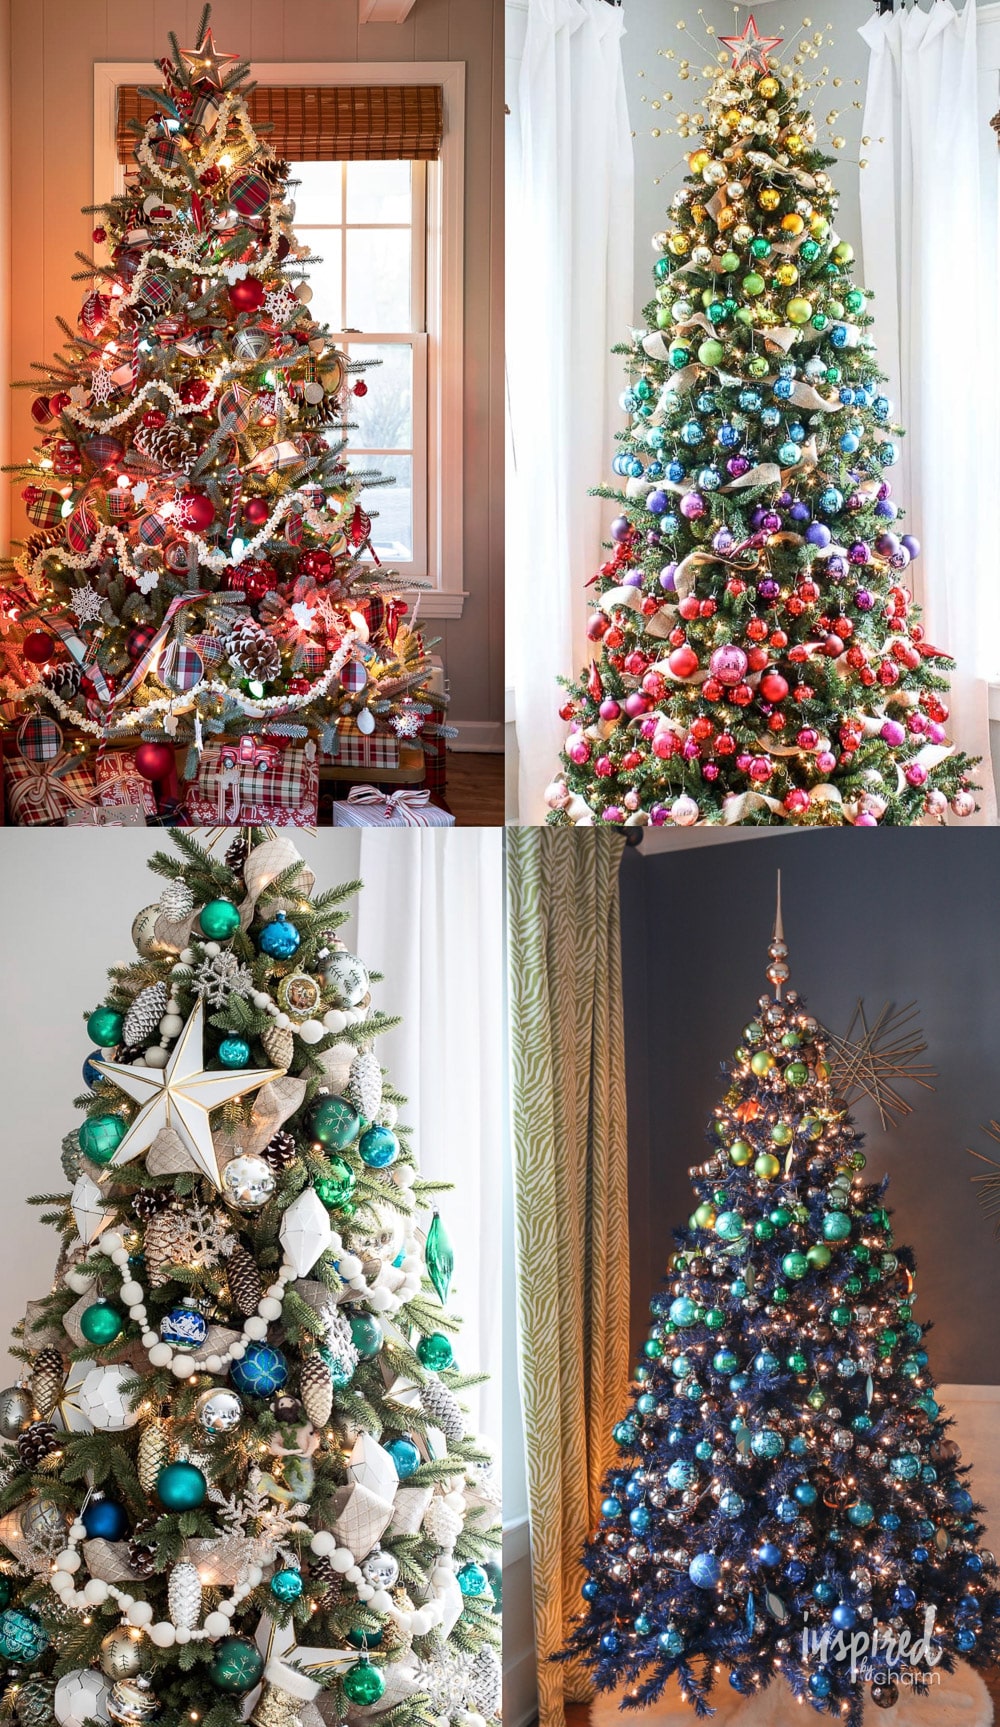 Christmas Tree Themes to Inspire Your Holiday Decor